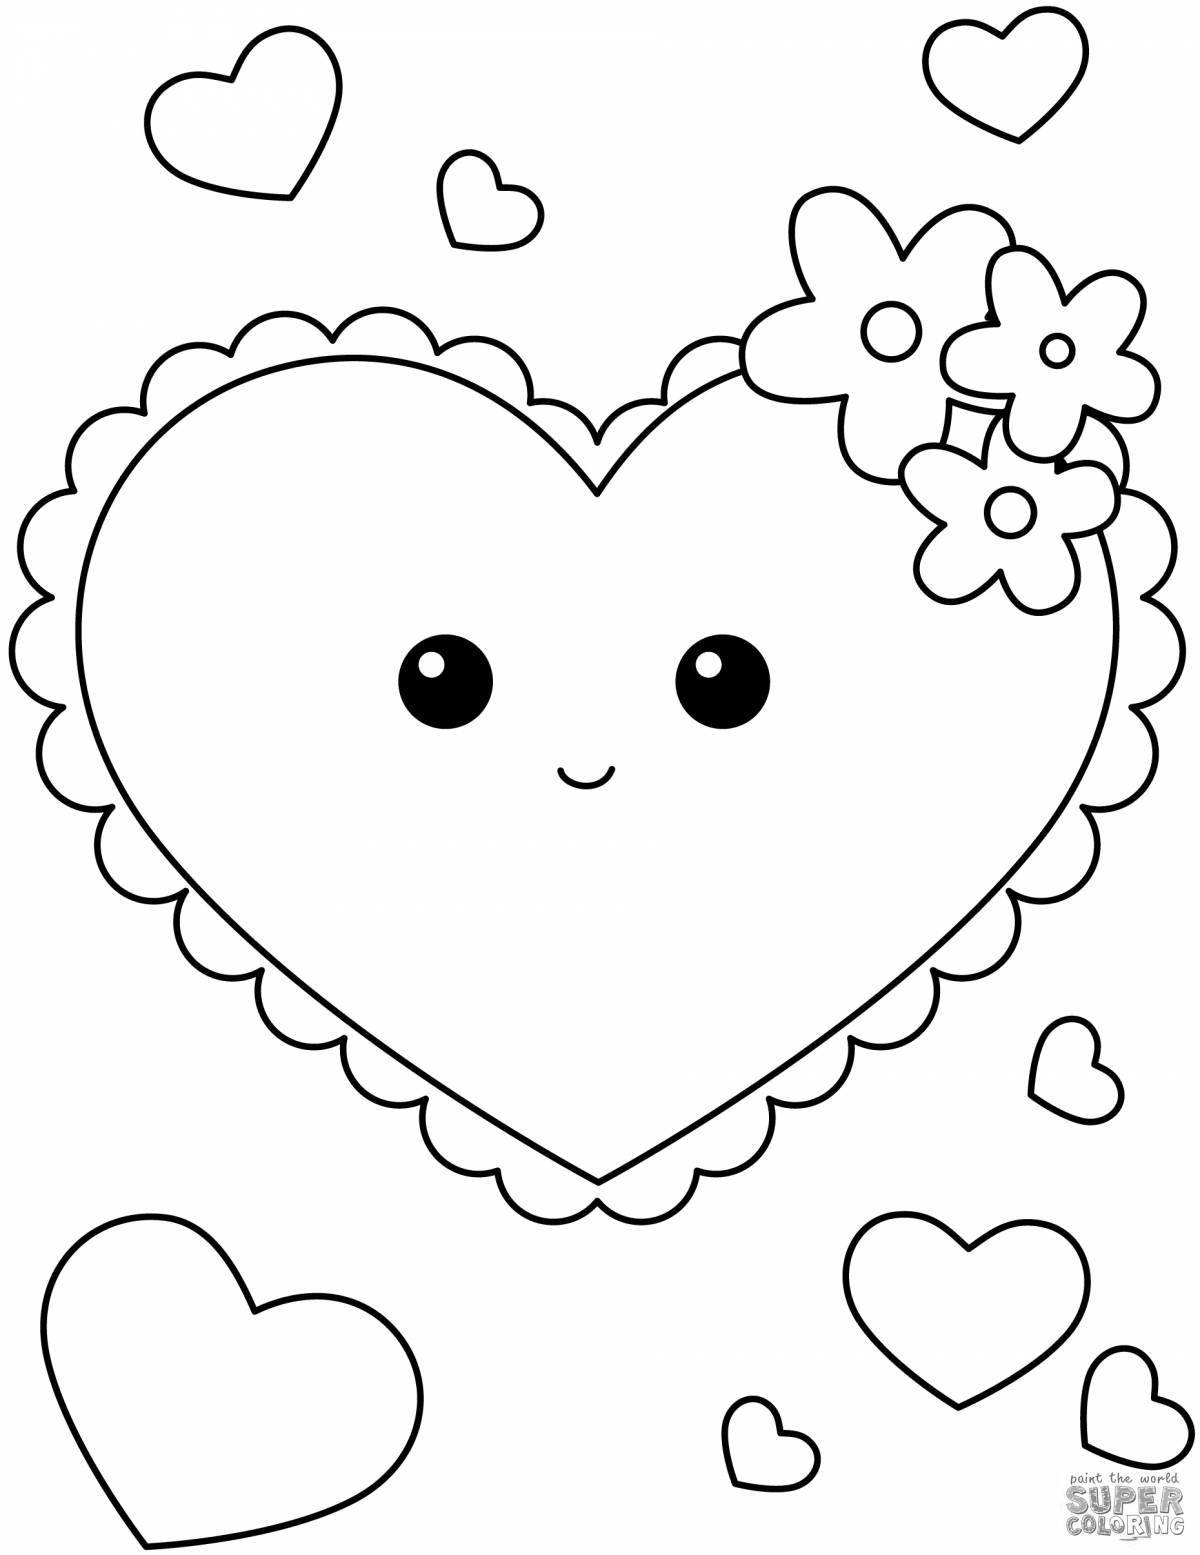 Bright heart coloring book for 3-4 year olds